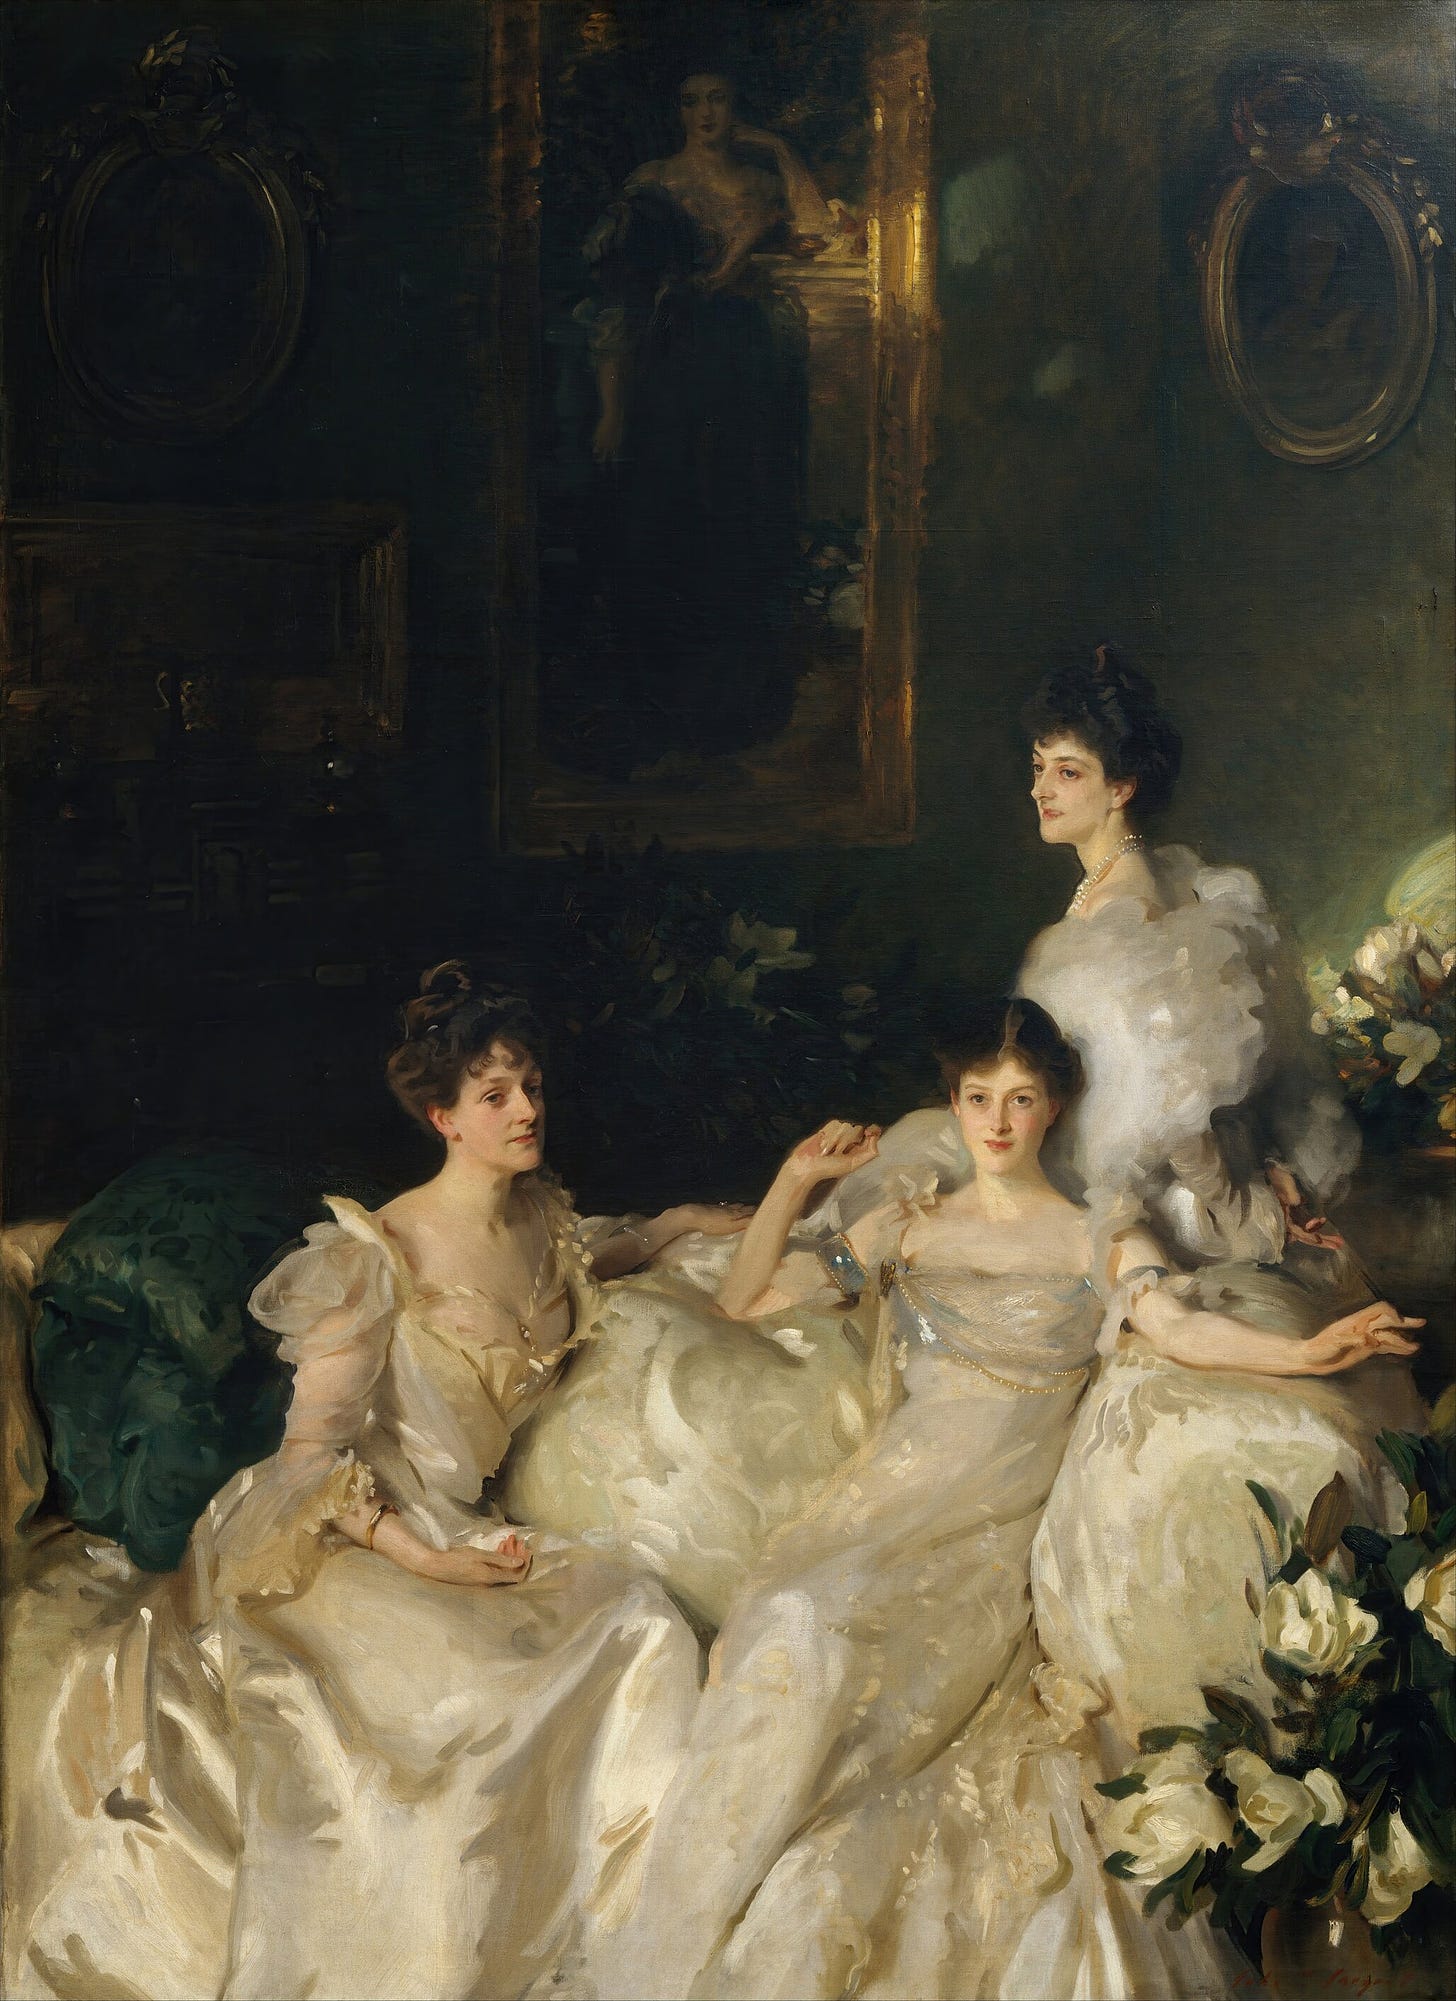 The Wyndham Sisters; Lady Elcho, Mrs. Adeane, and Mrs. Tennant (1899)